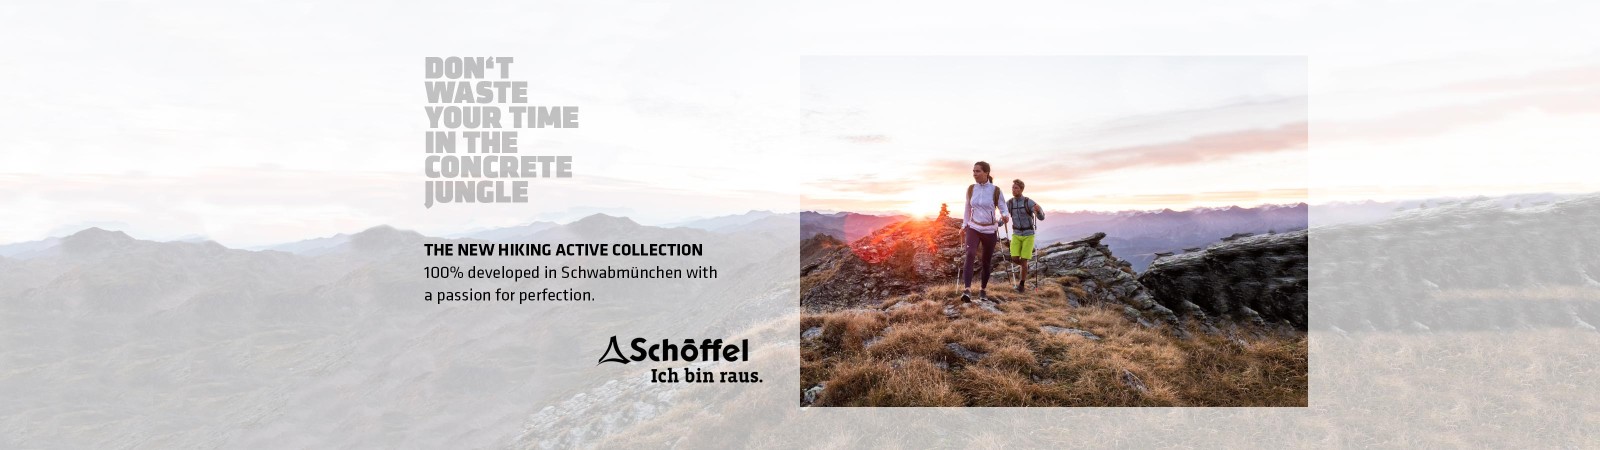 The new Hiking Active Collection